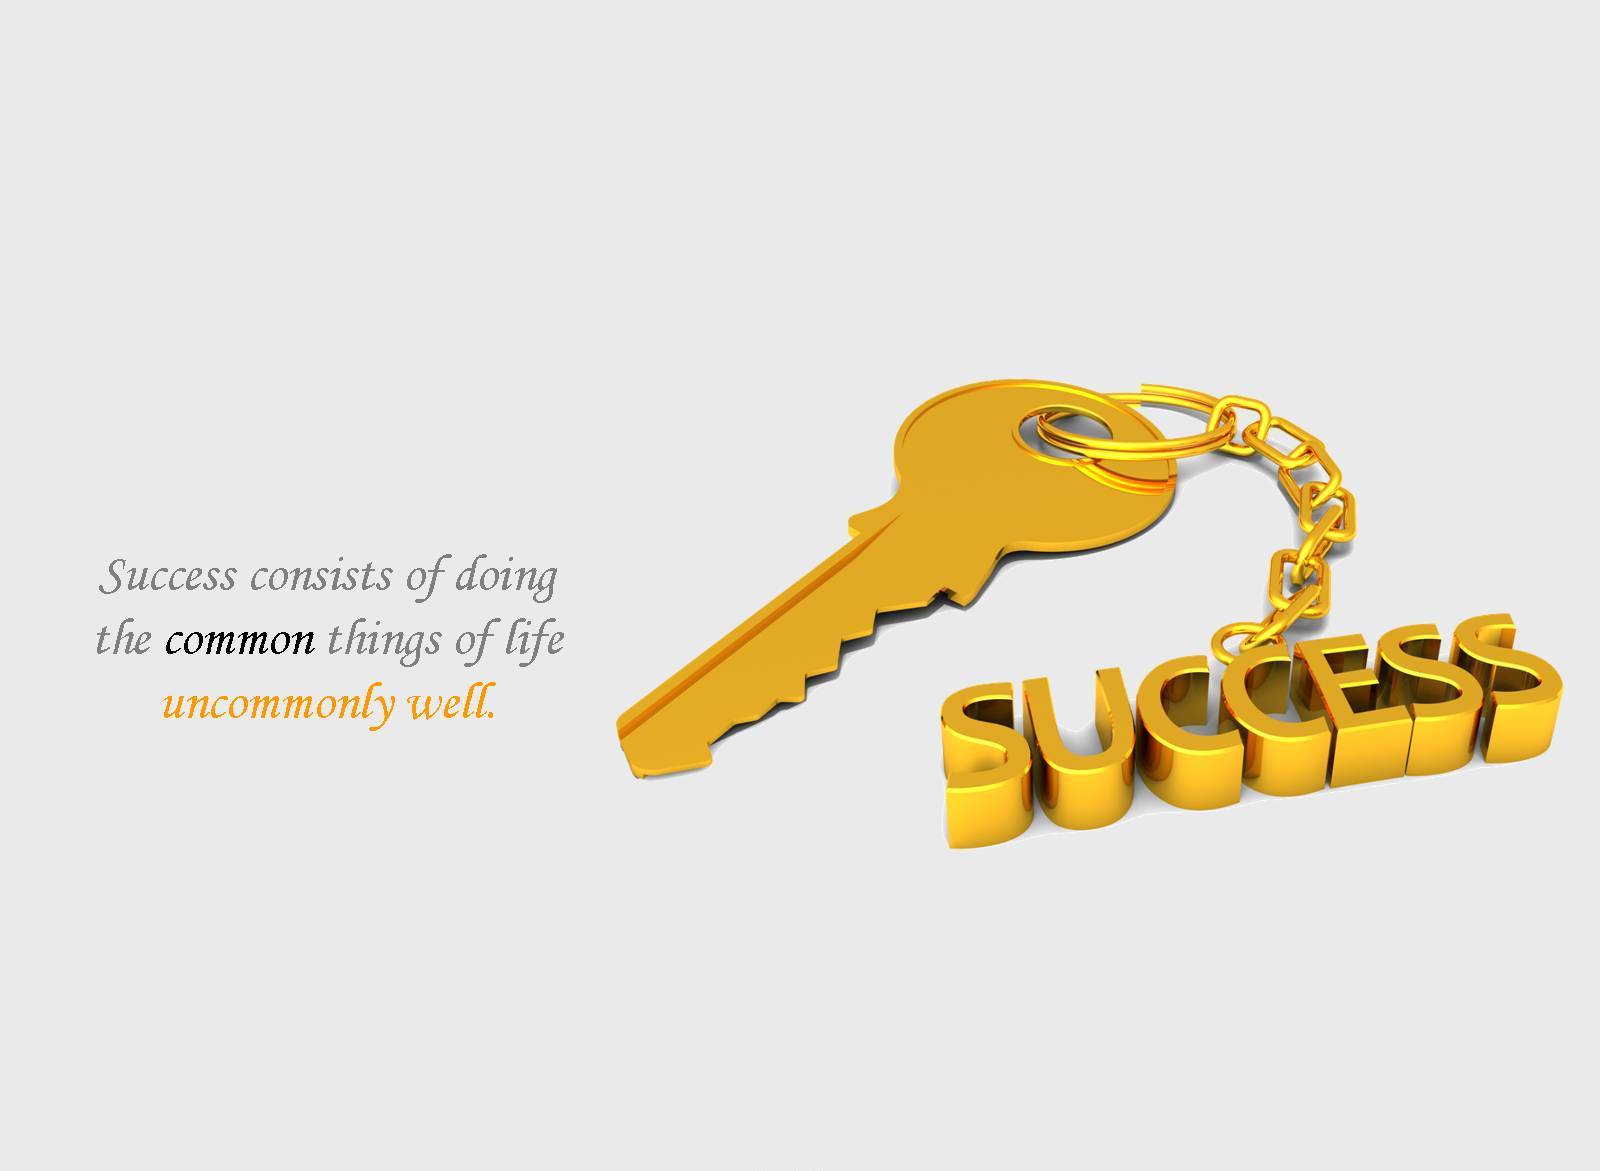 Motivational wallpaper on Success, Success Consists of doing. Dont